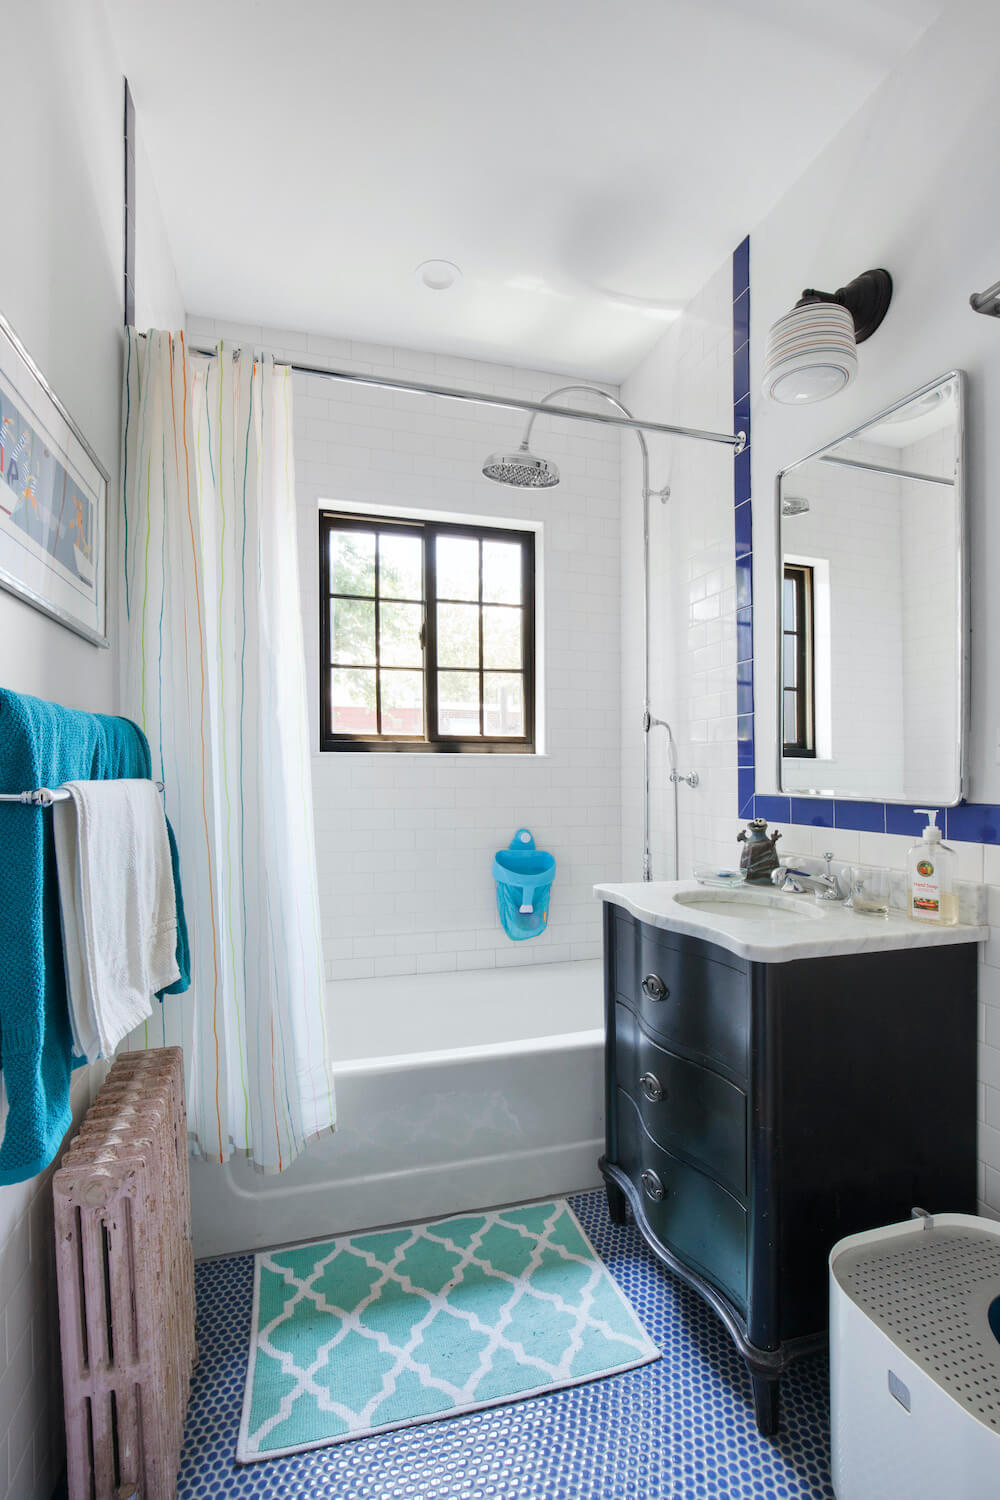 White bathtub in a white and blue bathroom with black vanity and oversized rainhead shower after renovation